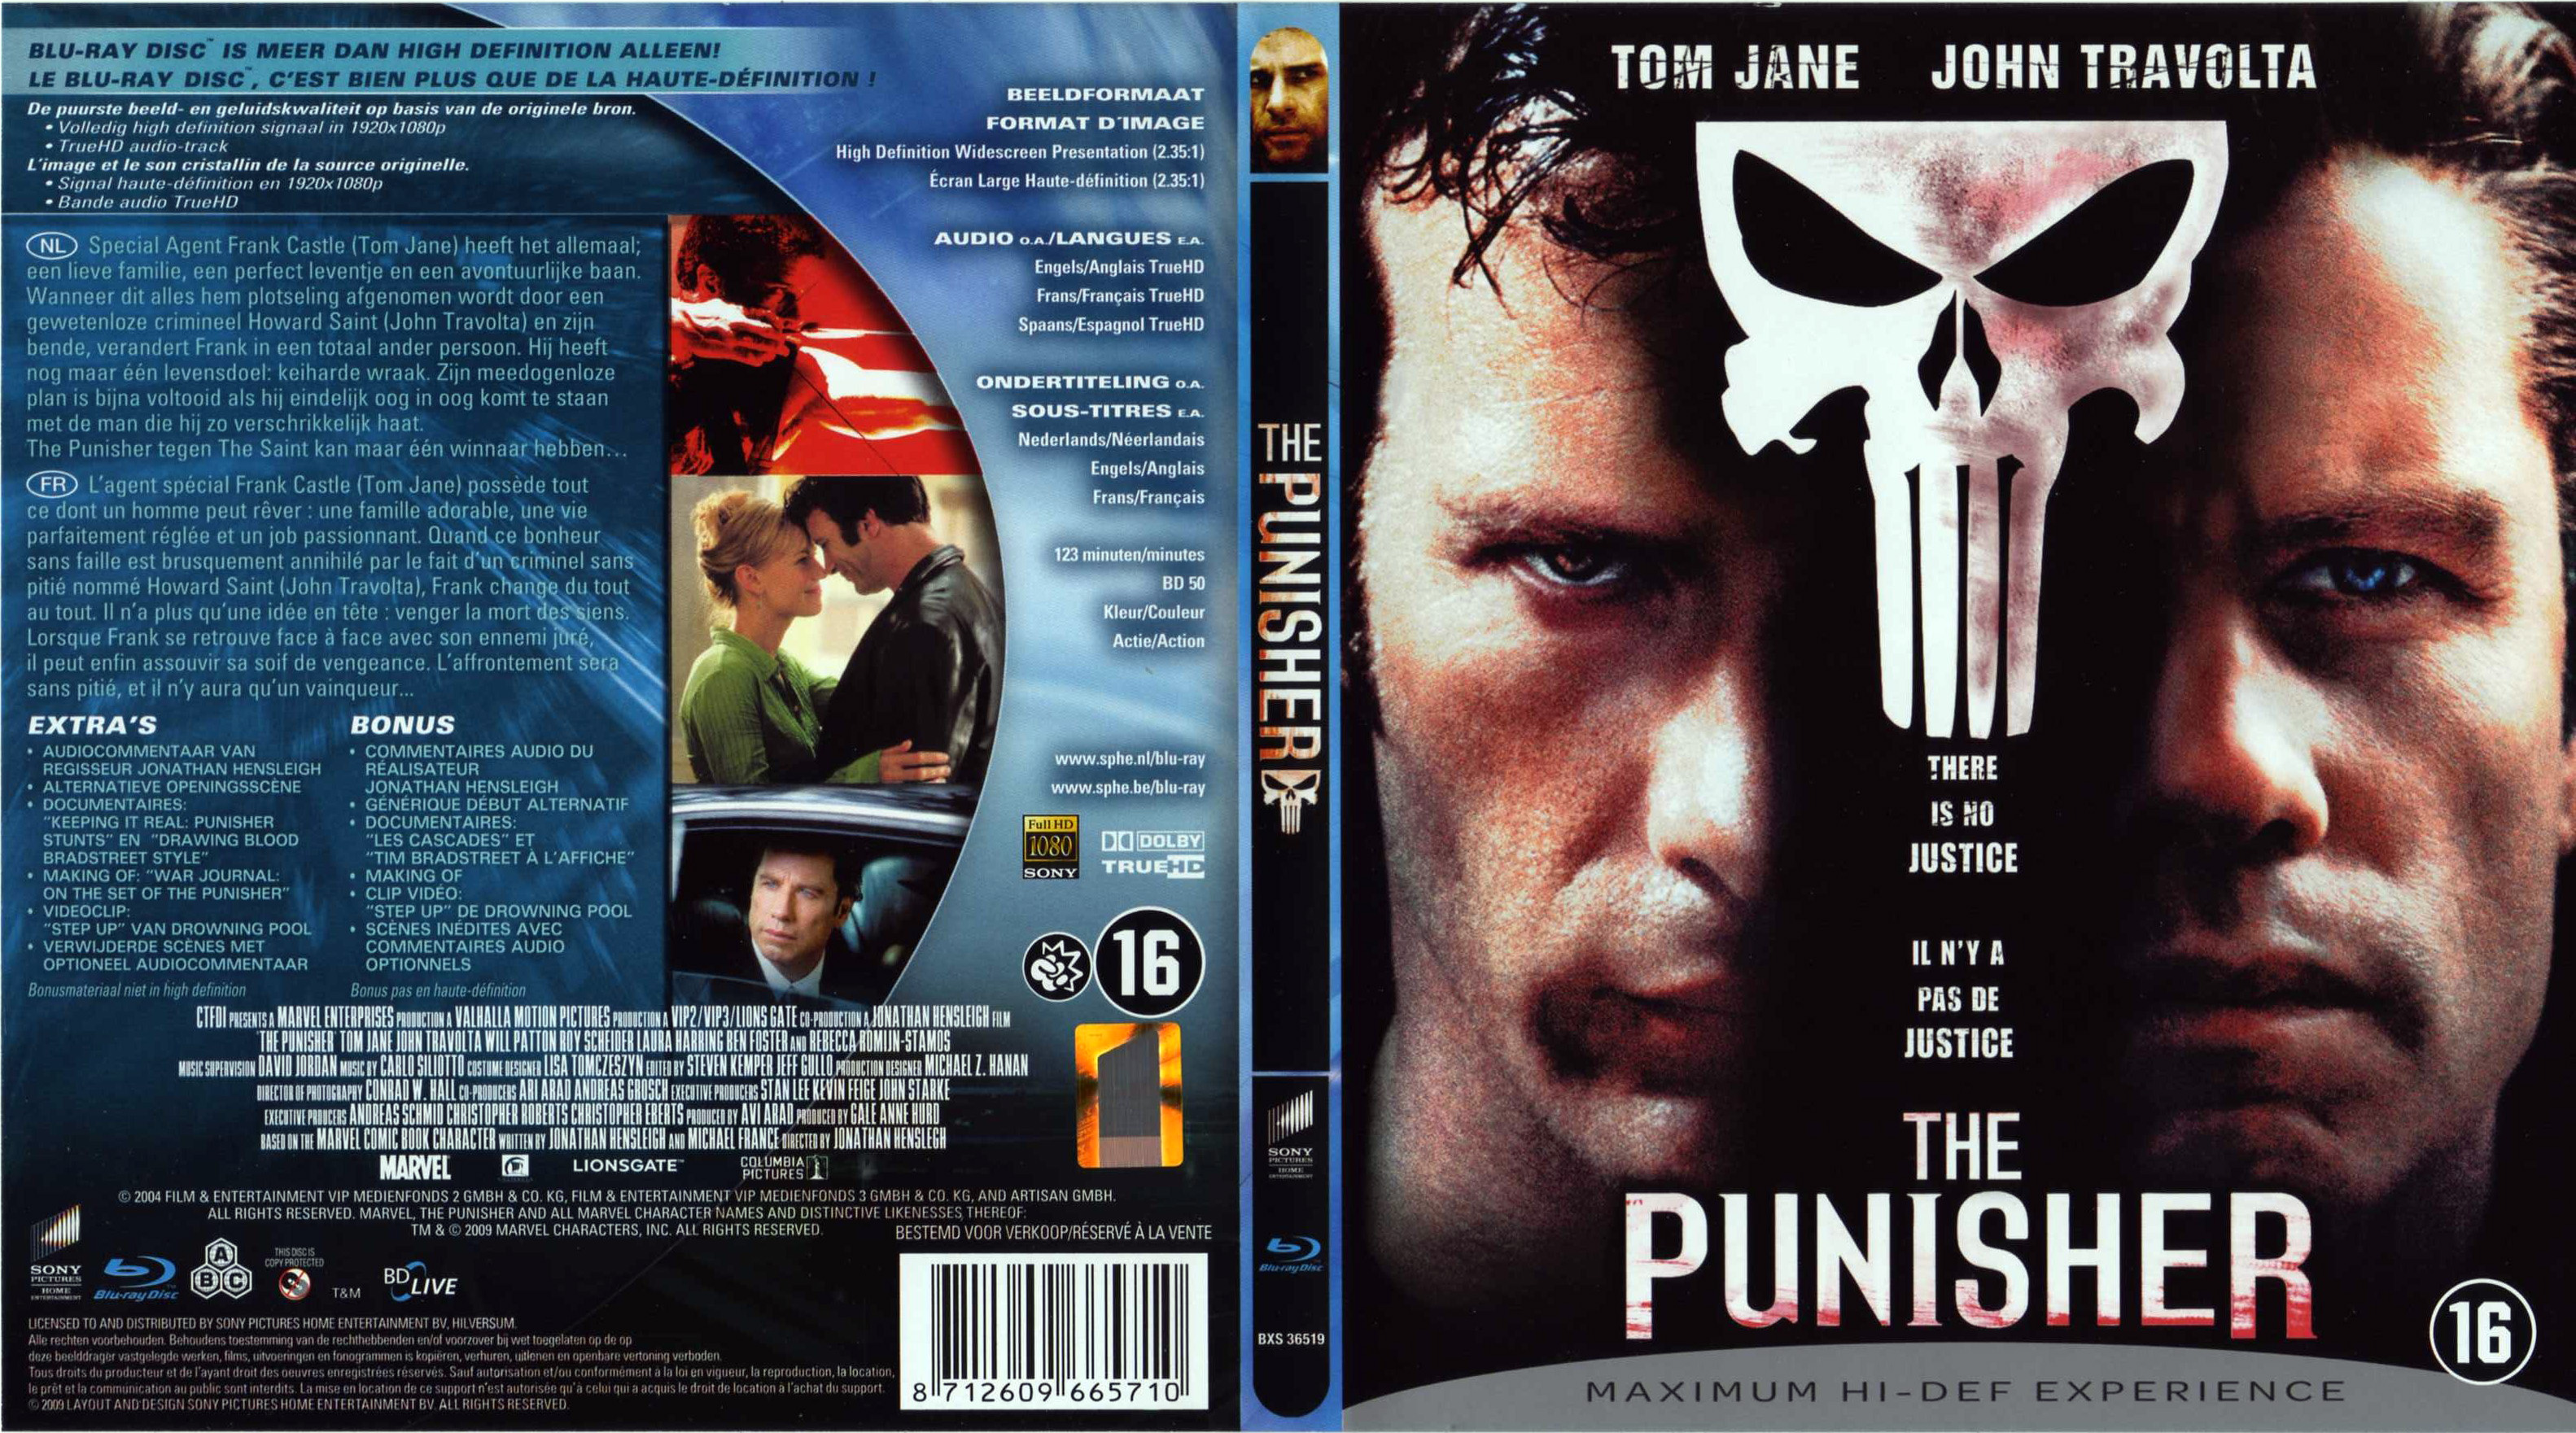 Jaquette DVD The punisher (BLU-RAY)